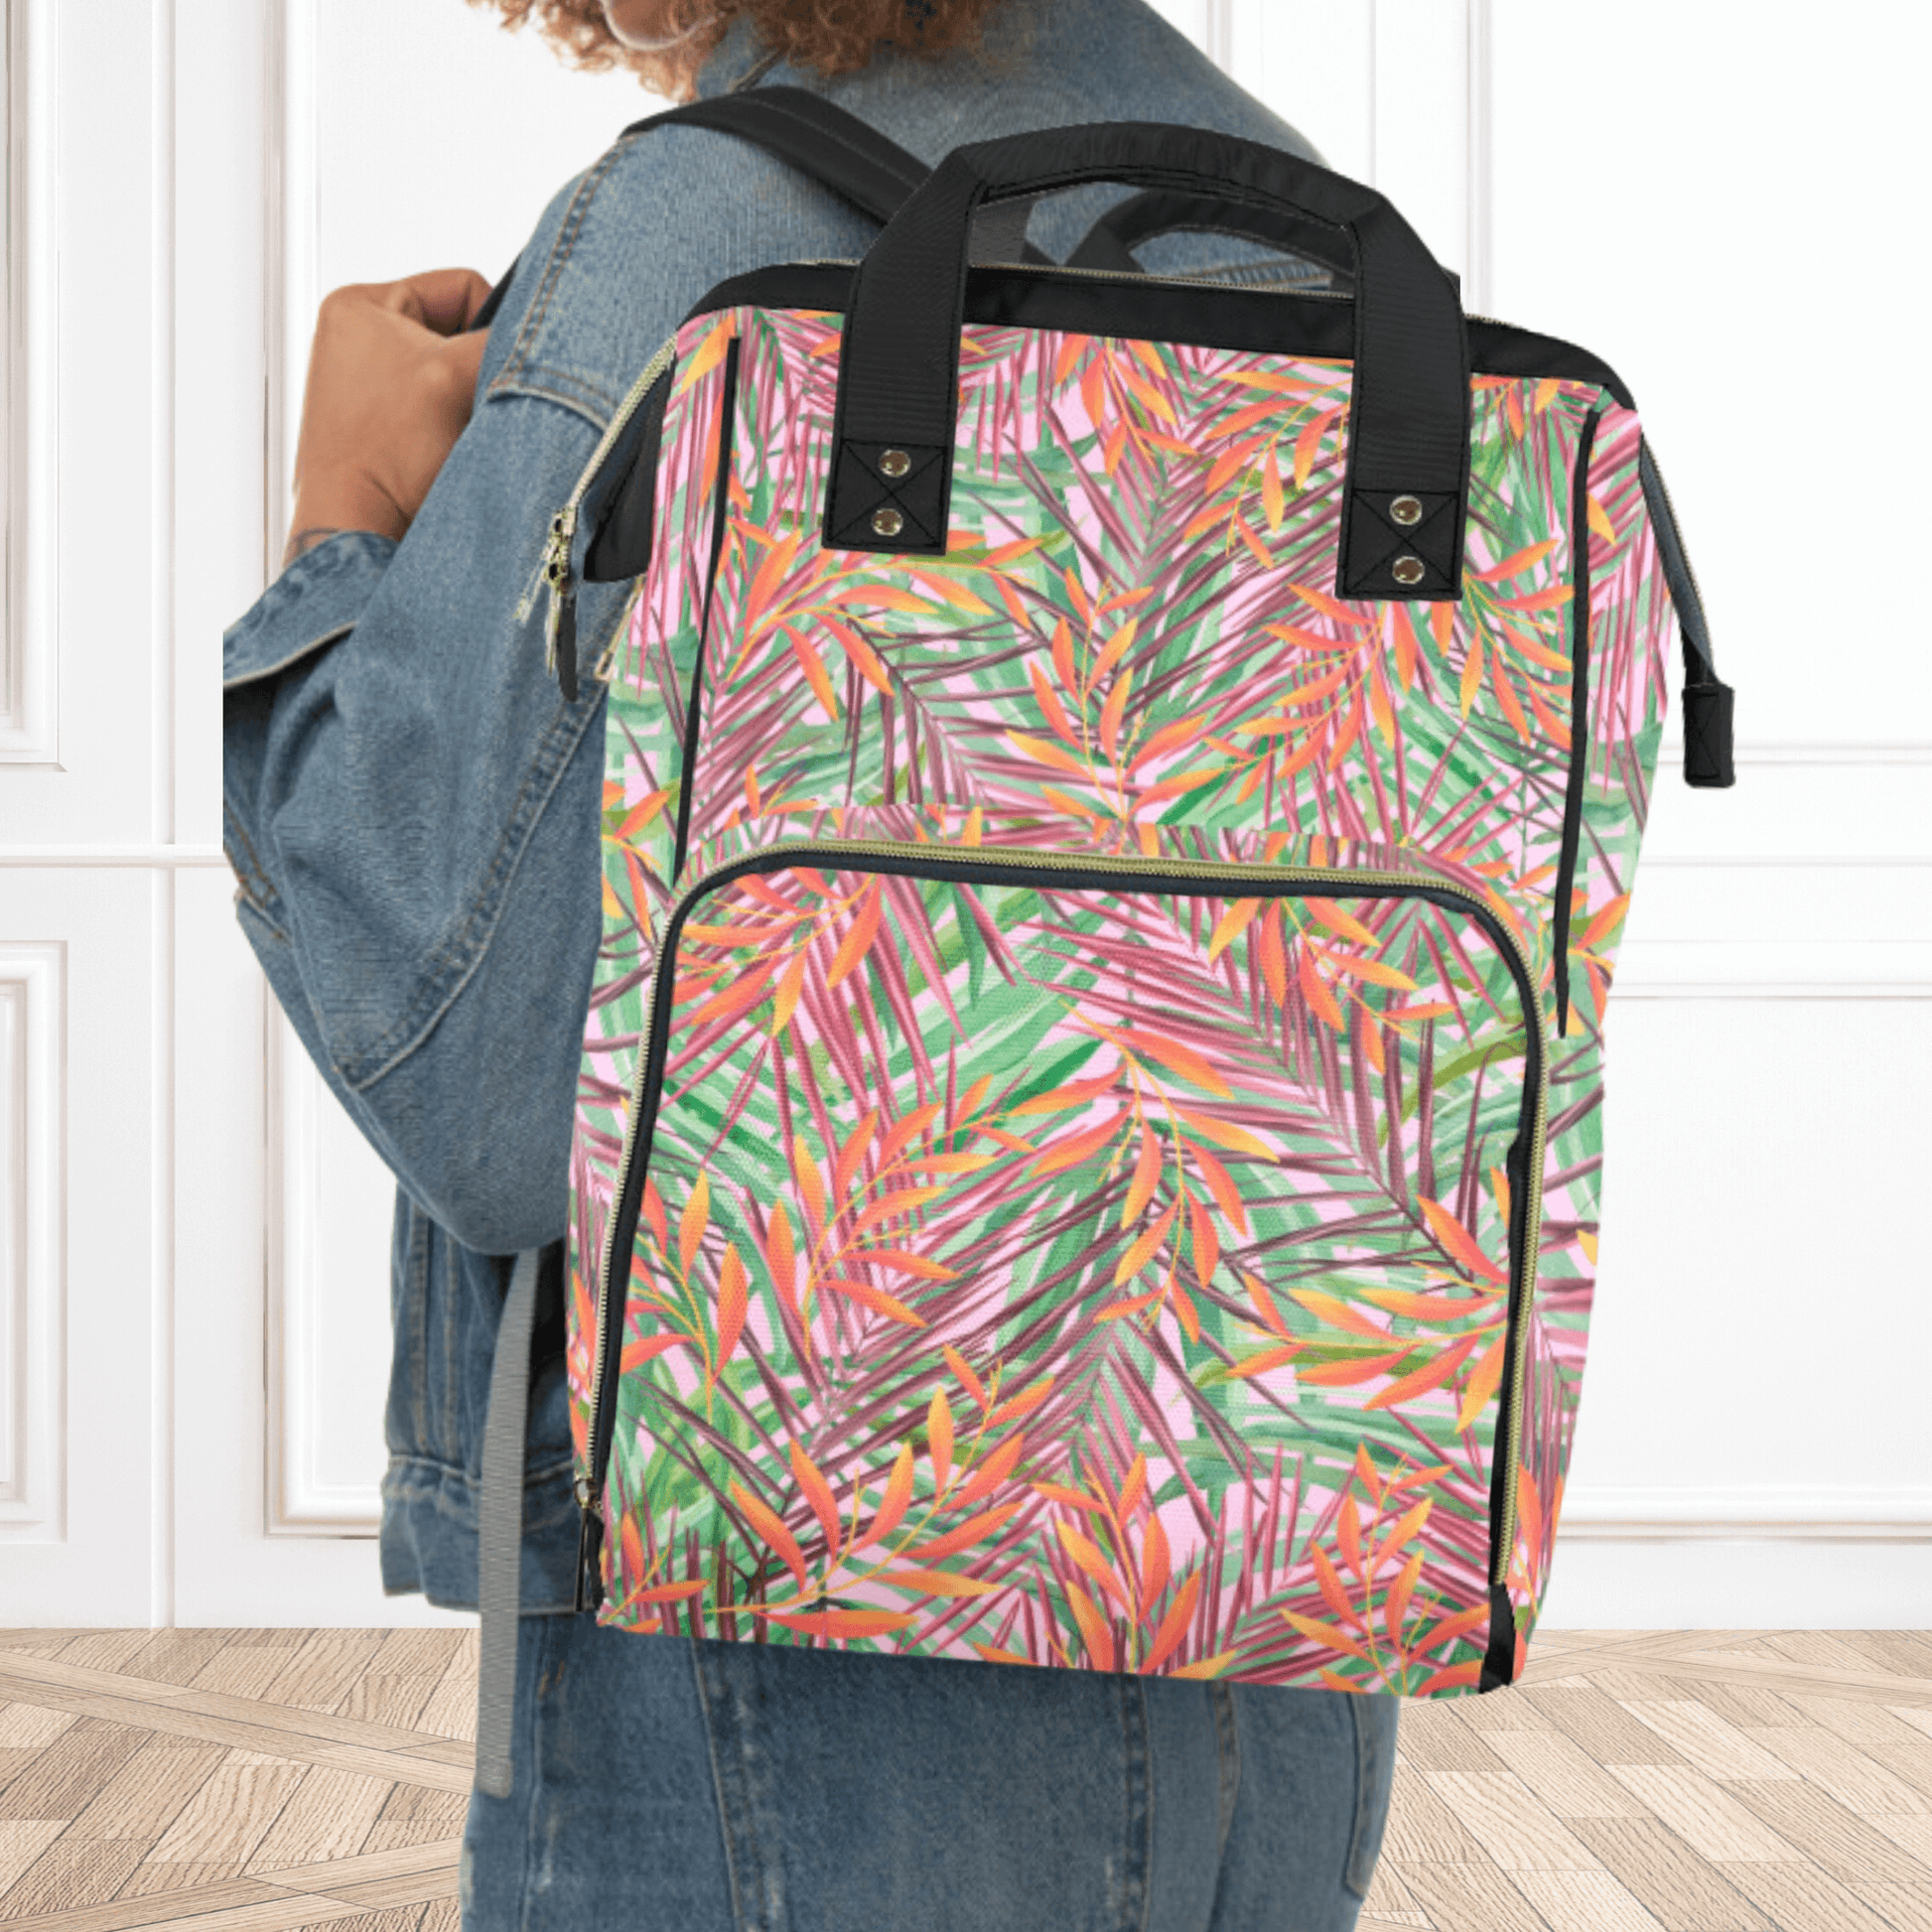 This diaper bag backpack makes the perfect carryon bag even without kids.